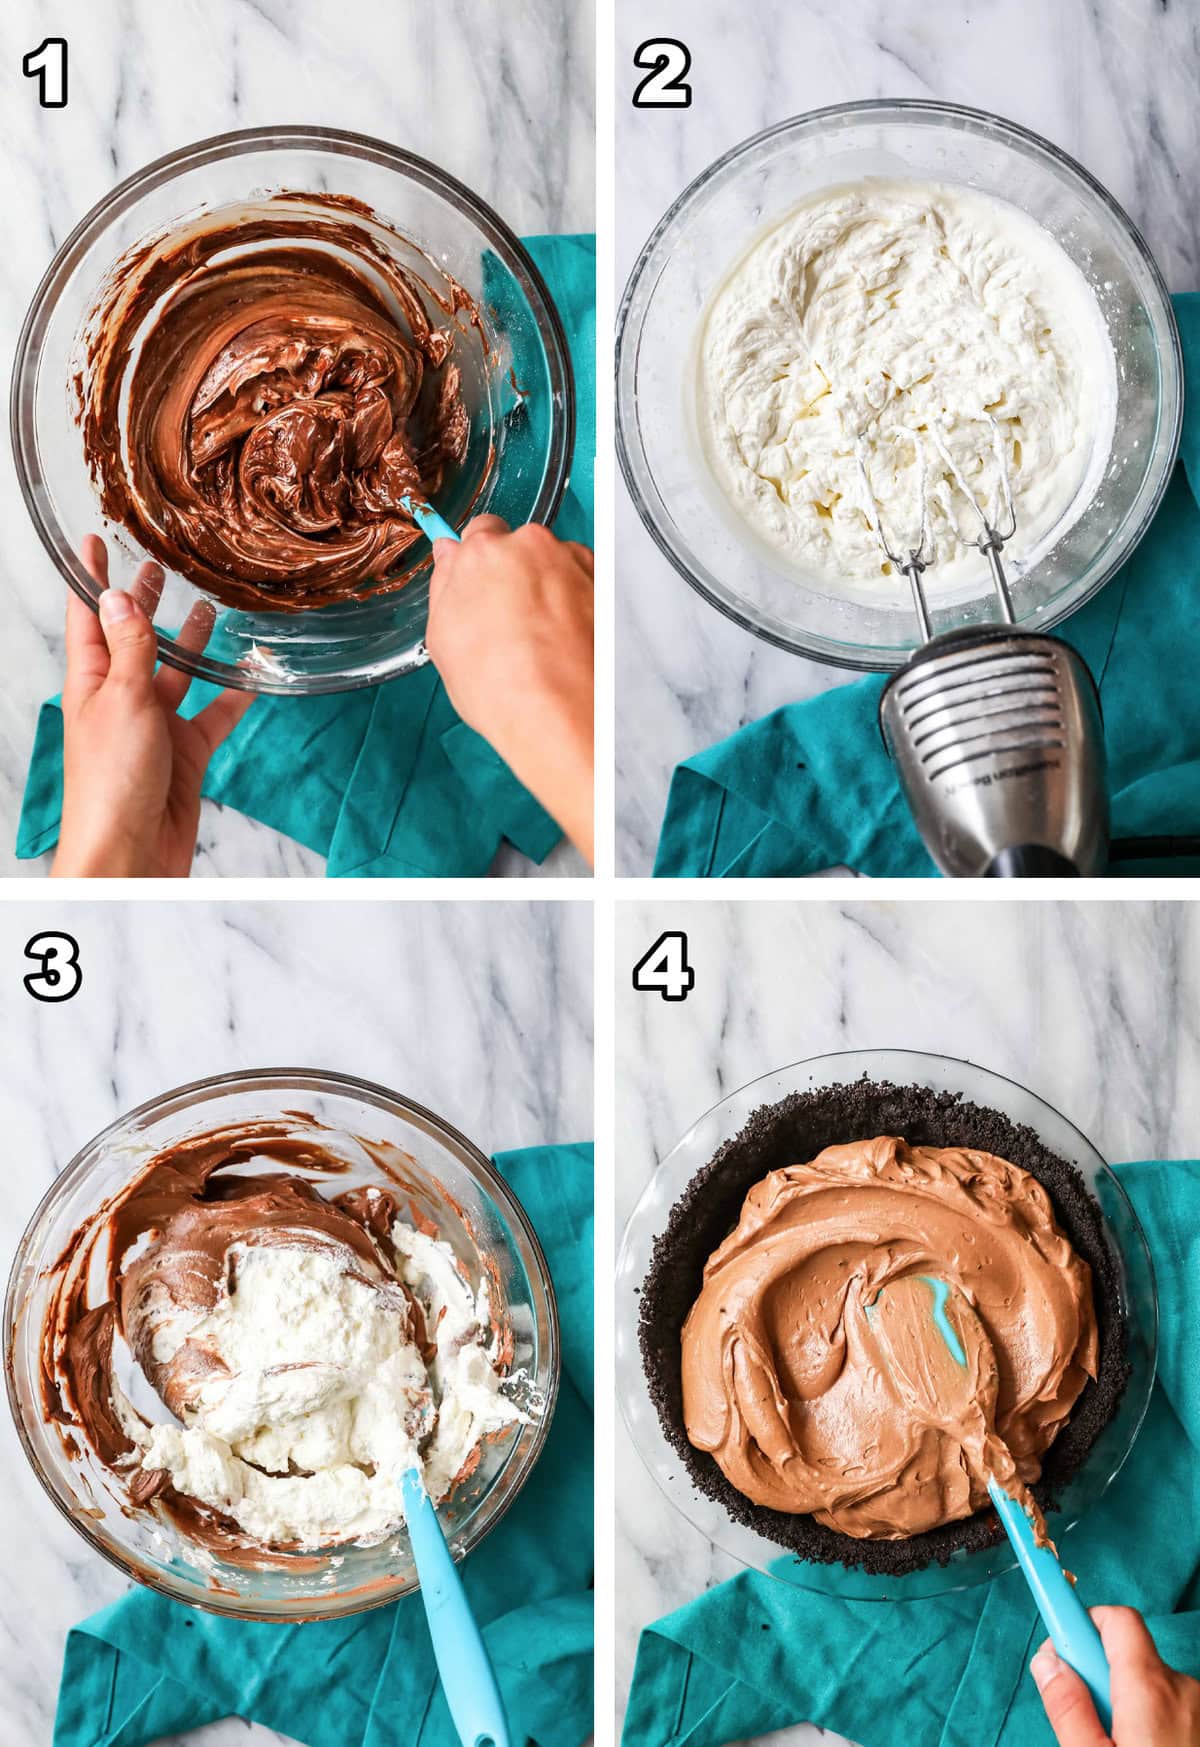 Four photos showing a creamy, chocolate based pie filling being prepared and spread into a chocolate cookie crust.